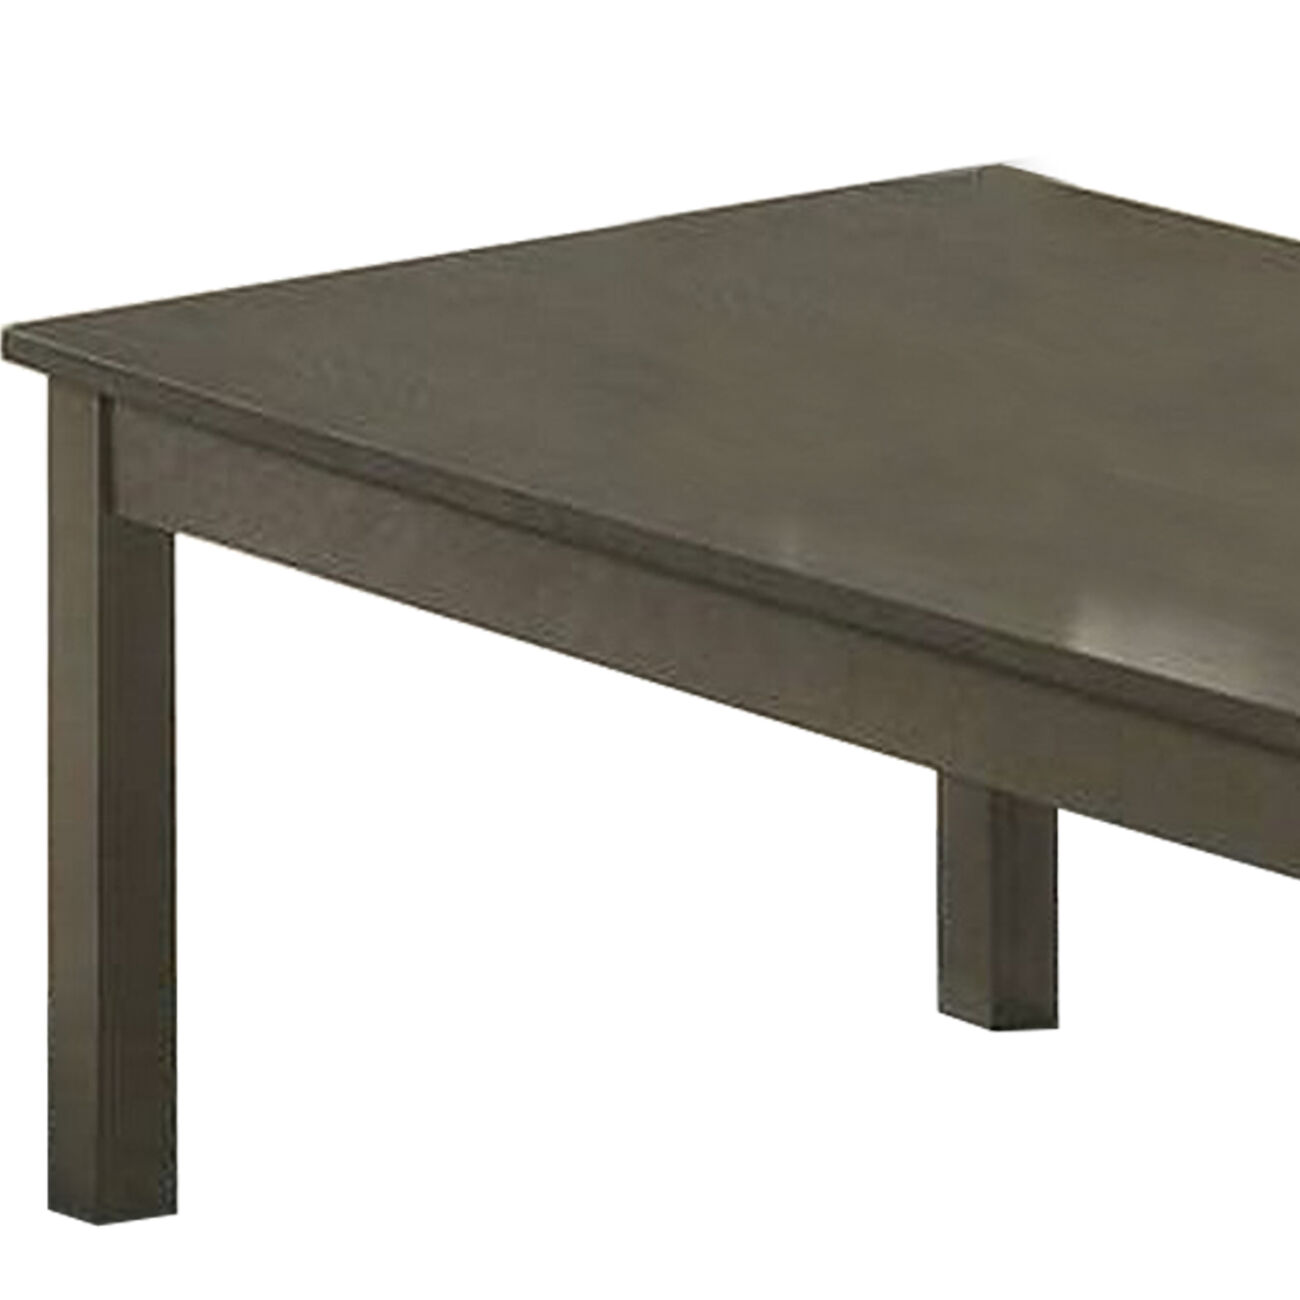 3 Piece Transitional Coffee Table and End Table with Block Legs, Gray